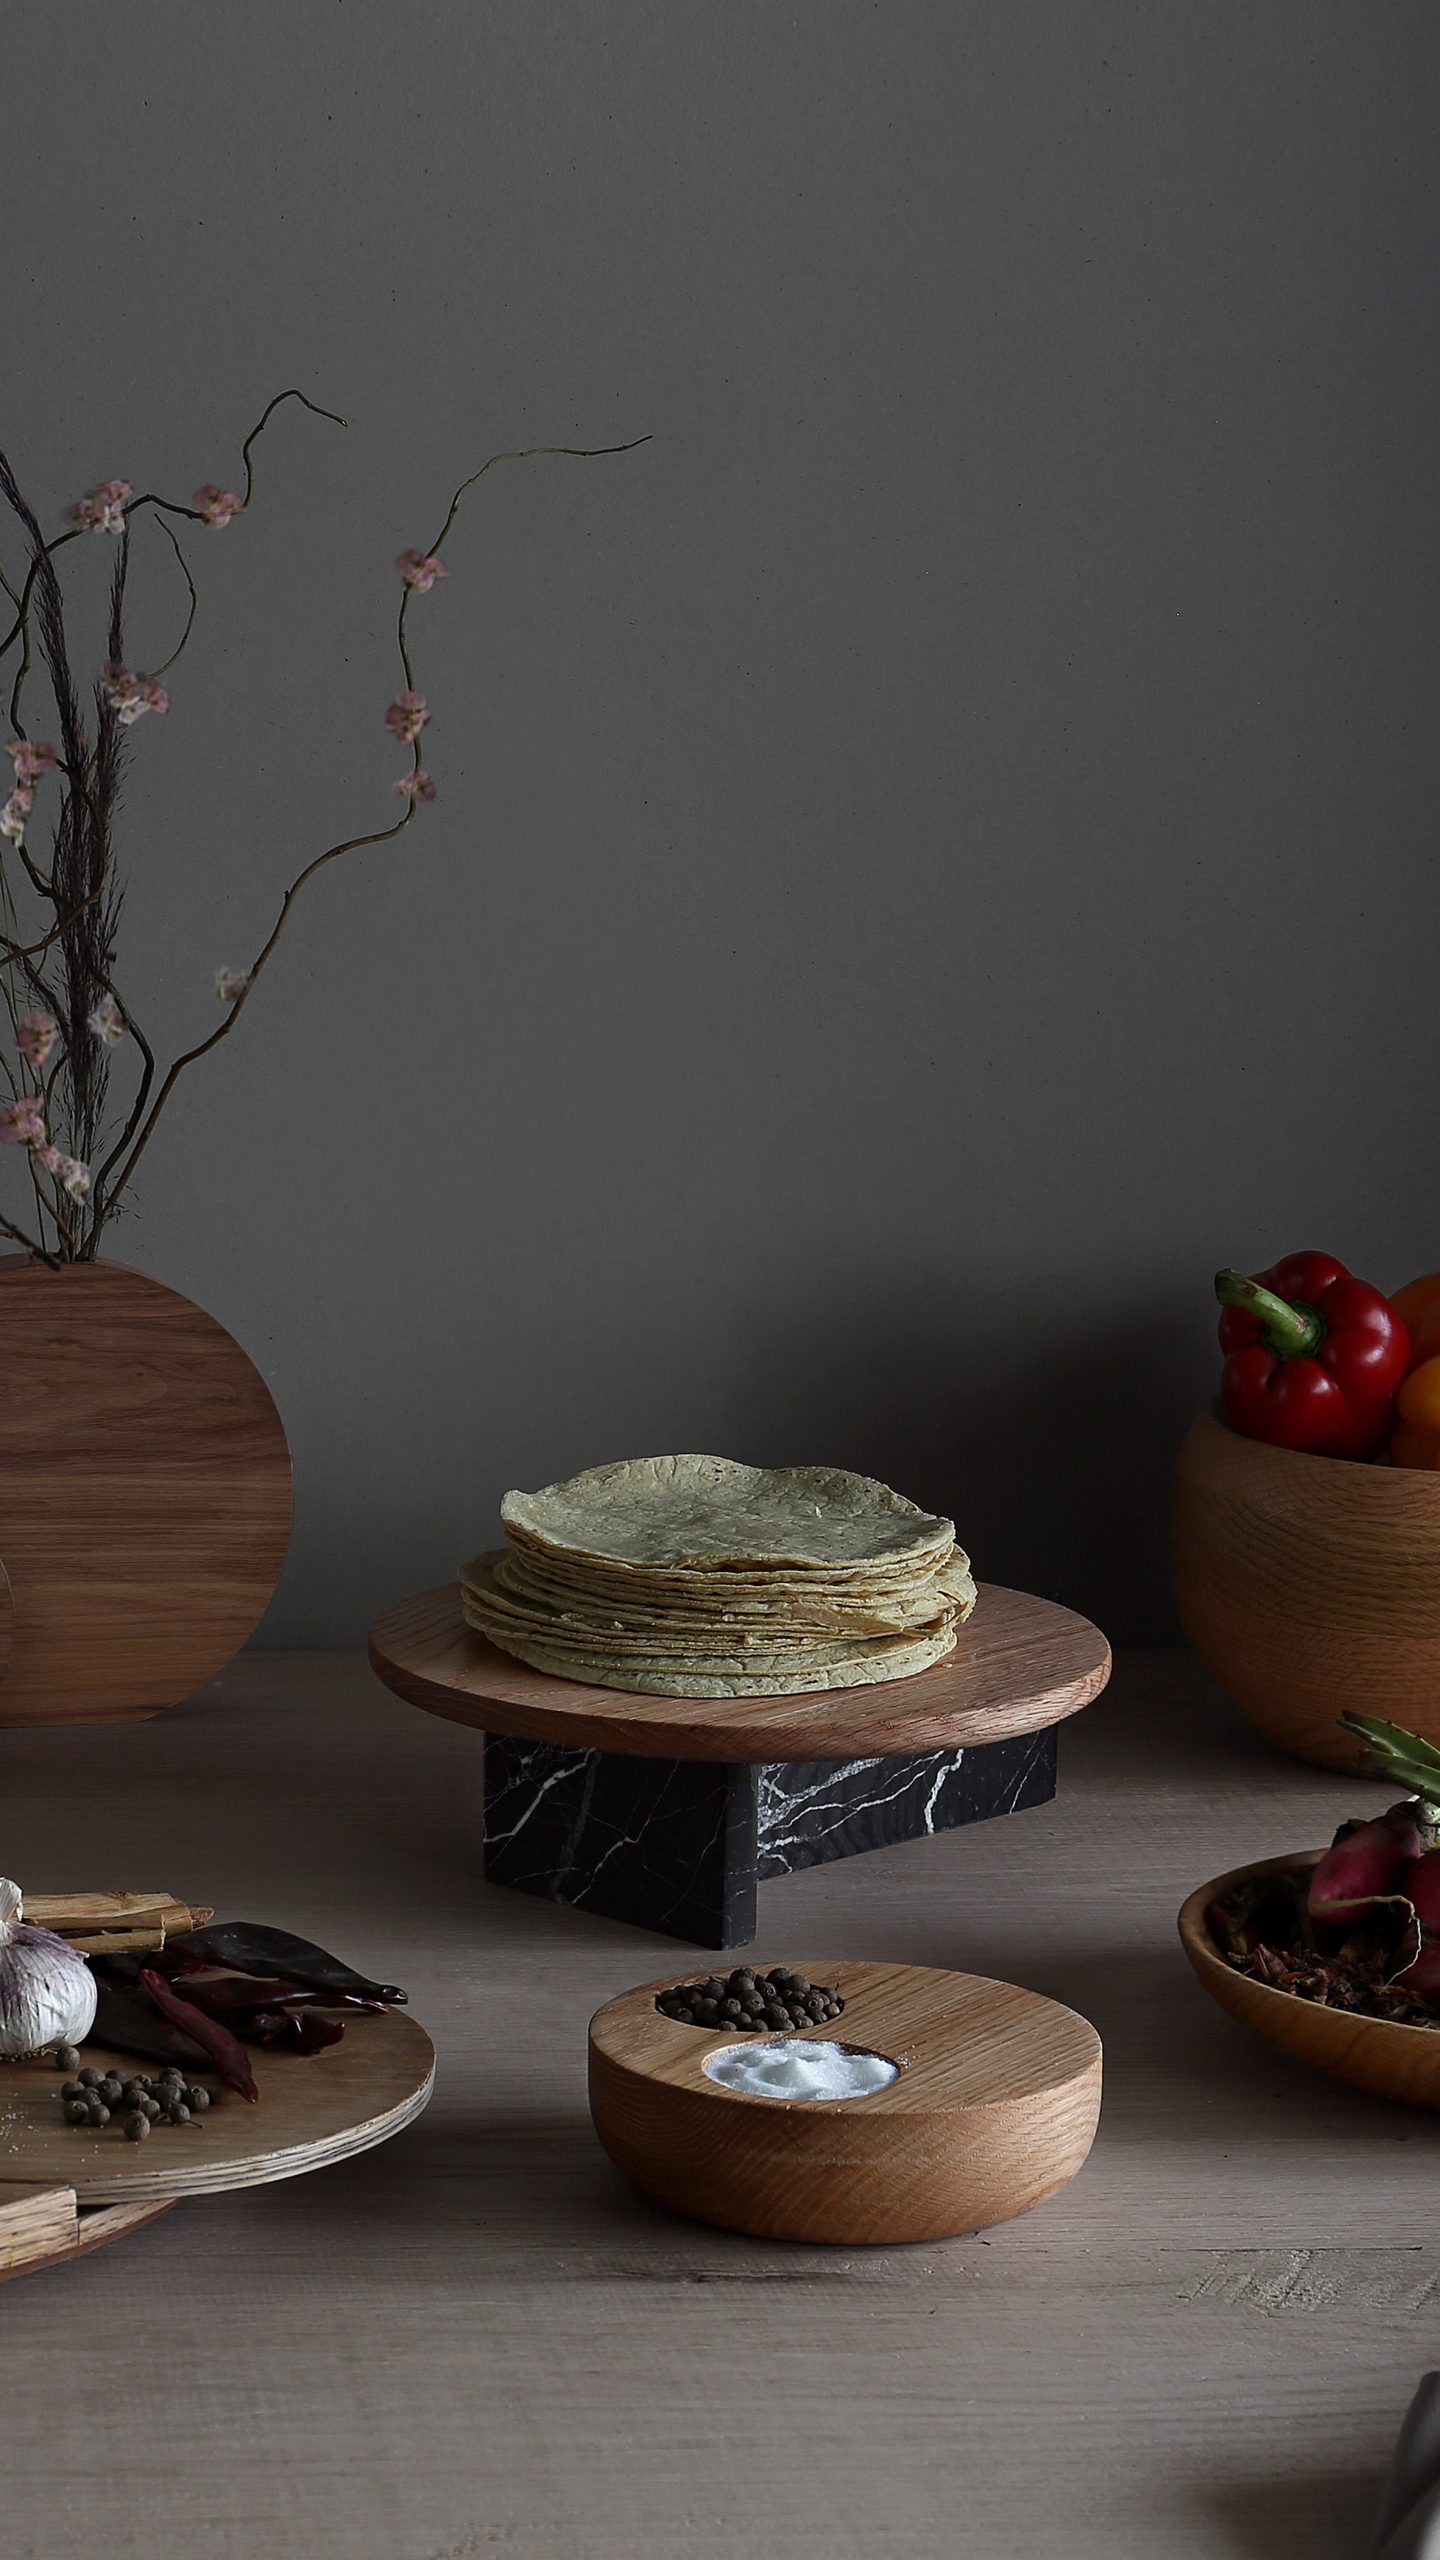 The marble serving plates made by Escalona's students contrast with other wooden objects